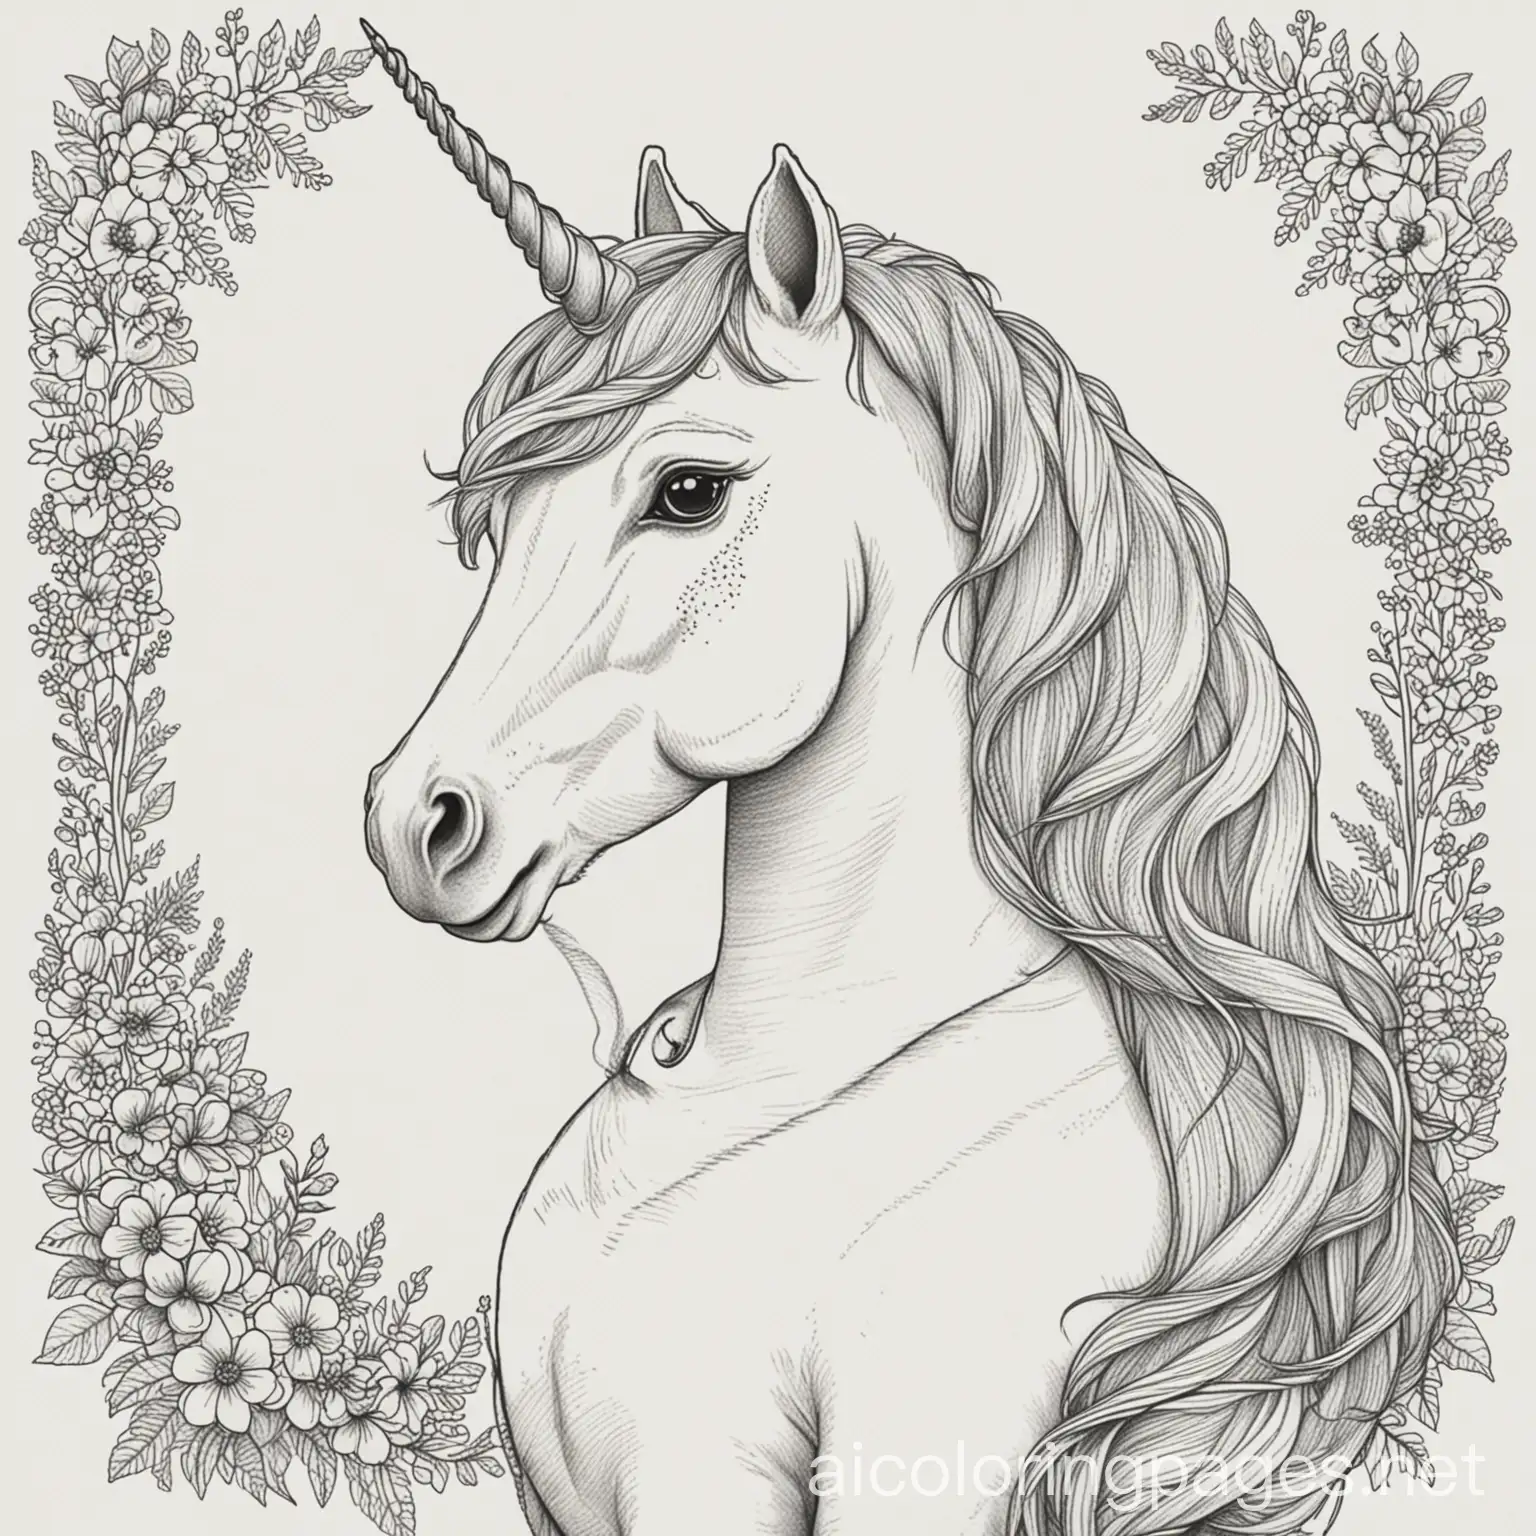 ein einhorn auf einer Hochzeit, Coloring Page, black and white, line art, white background, Simplicity, Ample White Space. The background of the coloring page is plain white to make it easy for young children to color within the lines. The outlines of all the subjects are easy to distinguish, making it simple for kids to color without too much difficulty